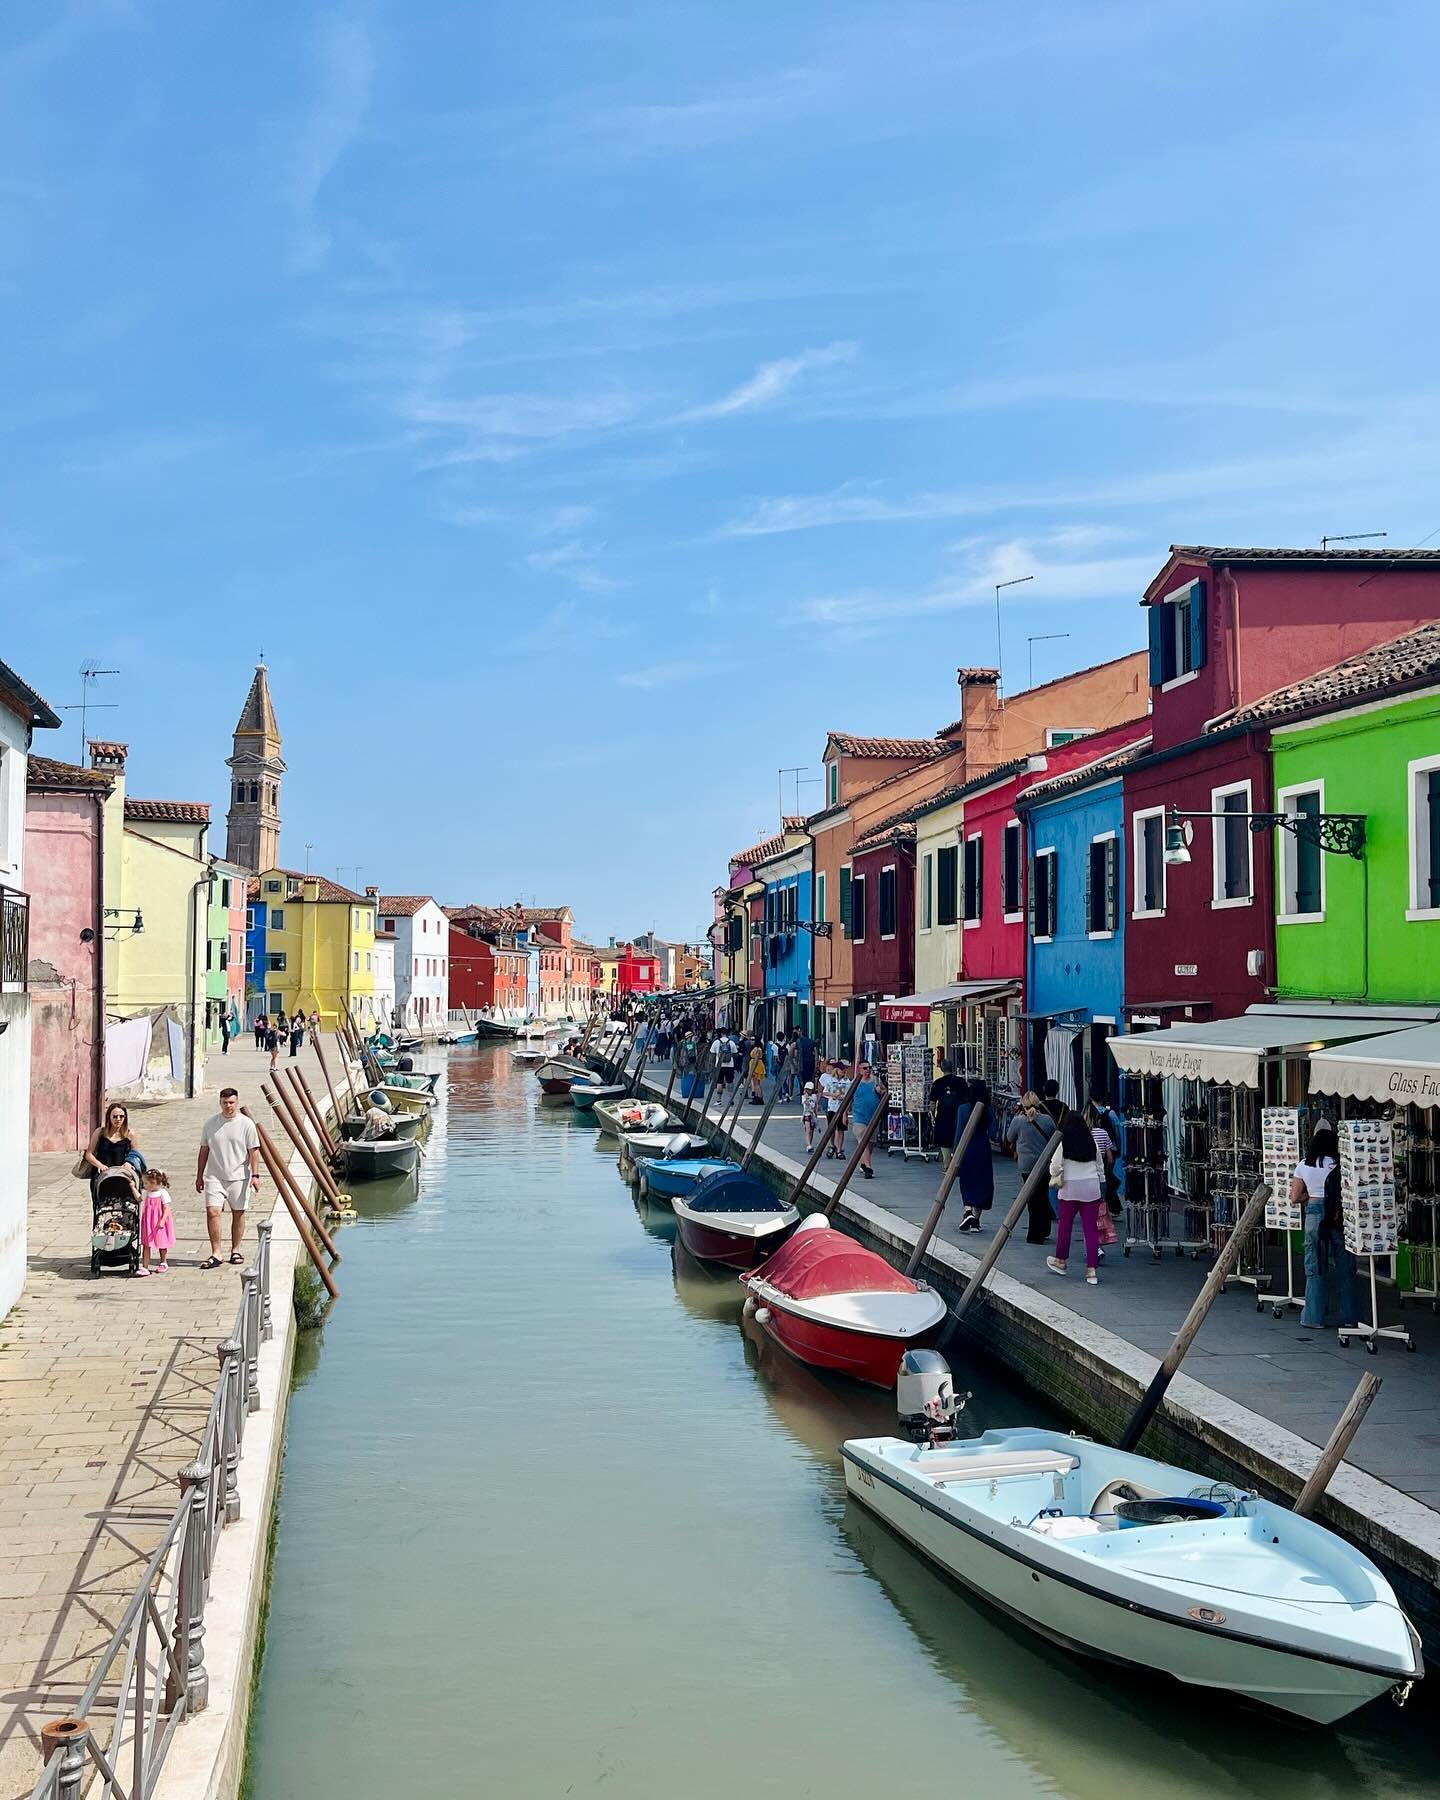 🖍️Postcards from colorful Burano from this past weekend in Venice 

Plus splashes of radicchio bitter aperitivo, horse tramezzini, tiramis&ugrave; and the new entry pass for day trippers (thoughts?!) not pictured: @labiennale and avoiding cannoli tr